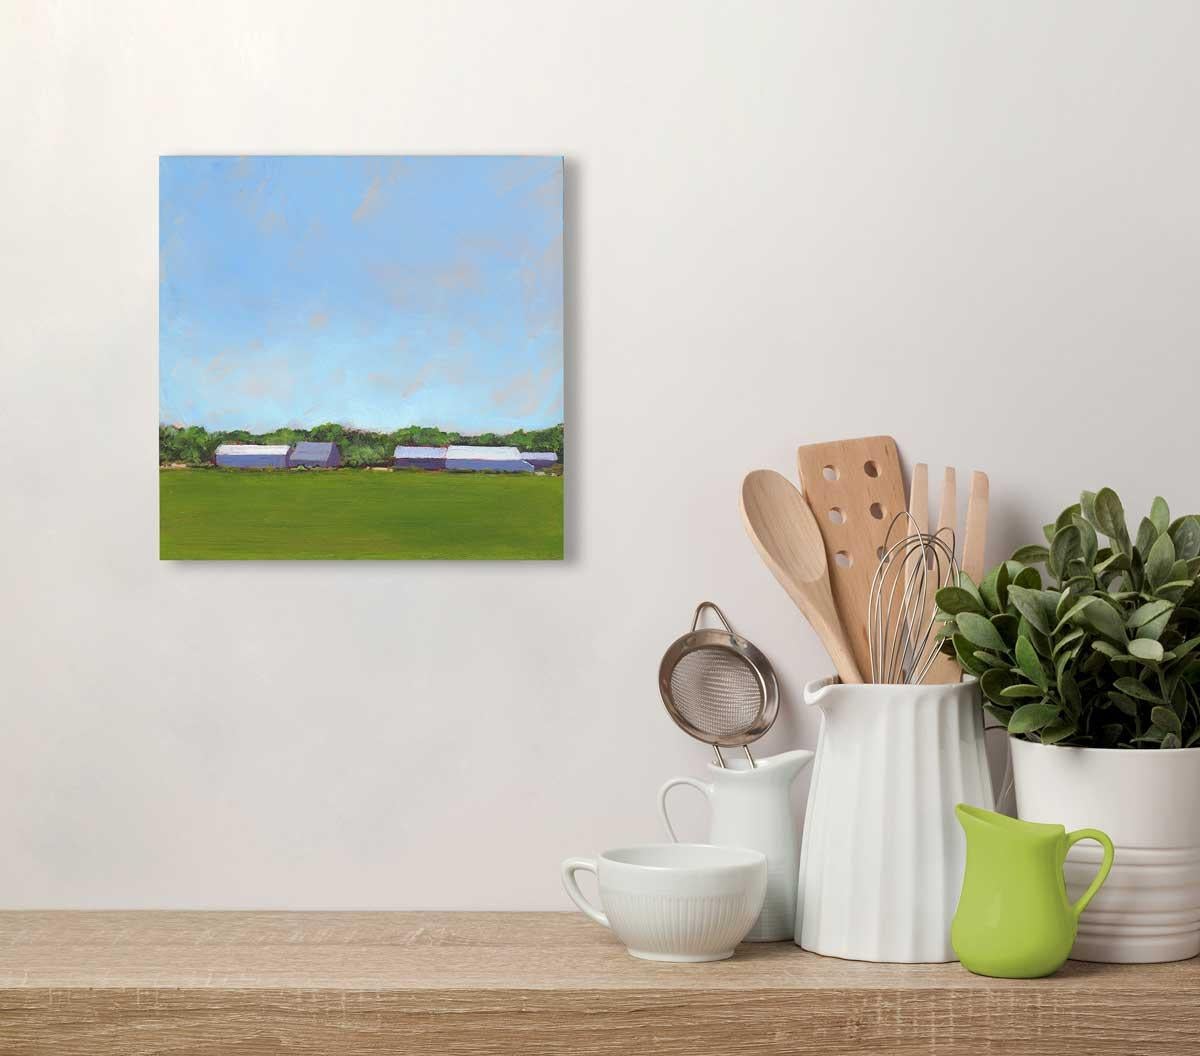 This small contemporary landscape painting by Carol Young features a scene of farmland, with green grass and foliage and cool violet barn structures along the horizon, beneath a painterly bright blue sky. The painting is made on board, and has clean